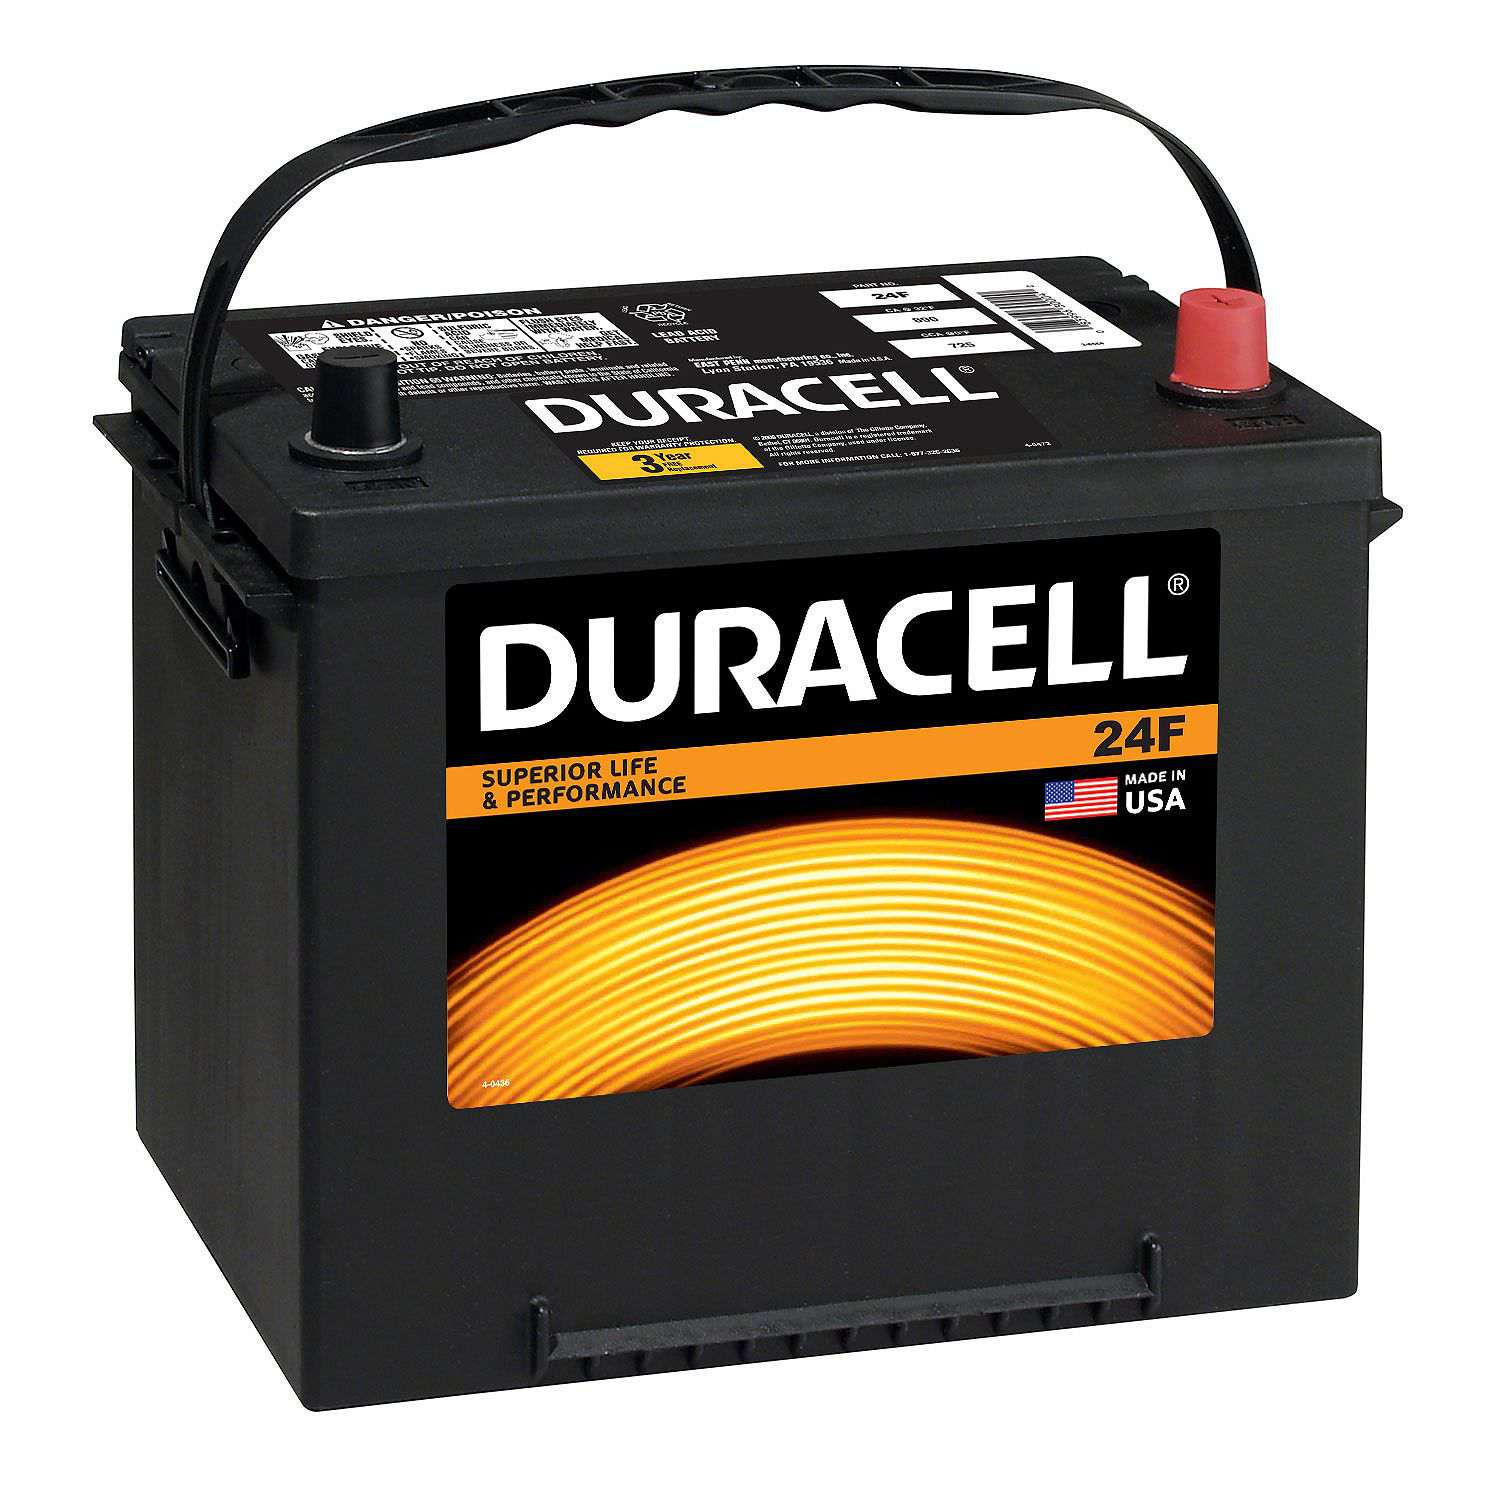 The 7 Best Places to Buy a Car Battery in 2020